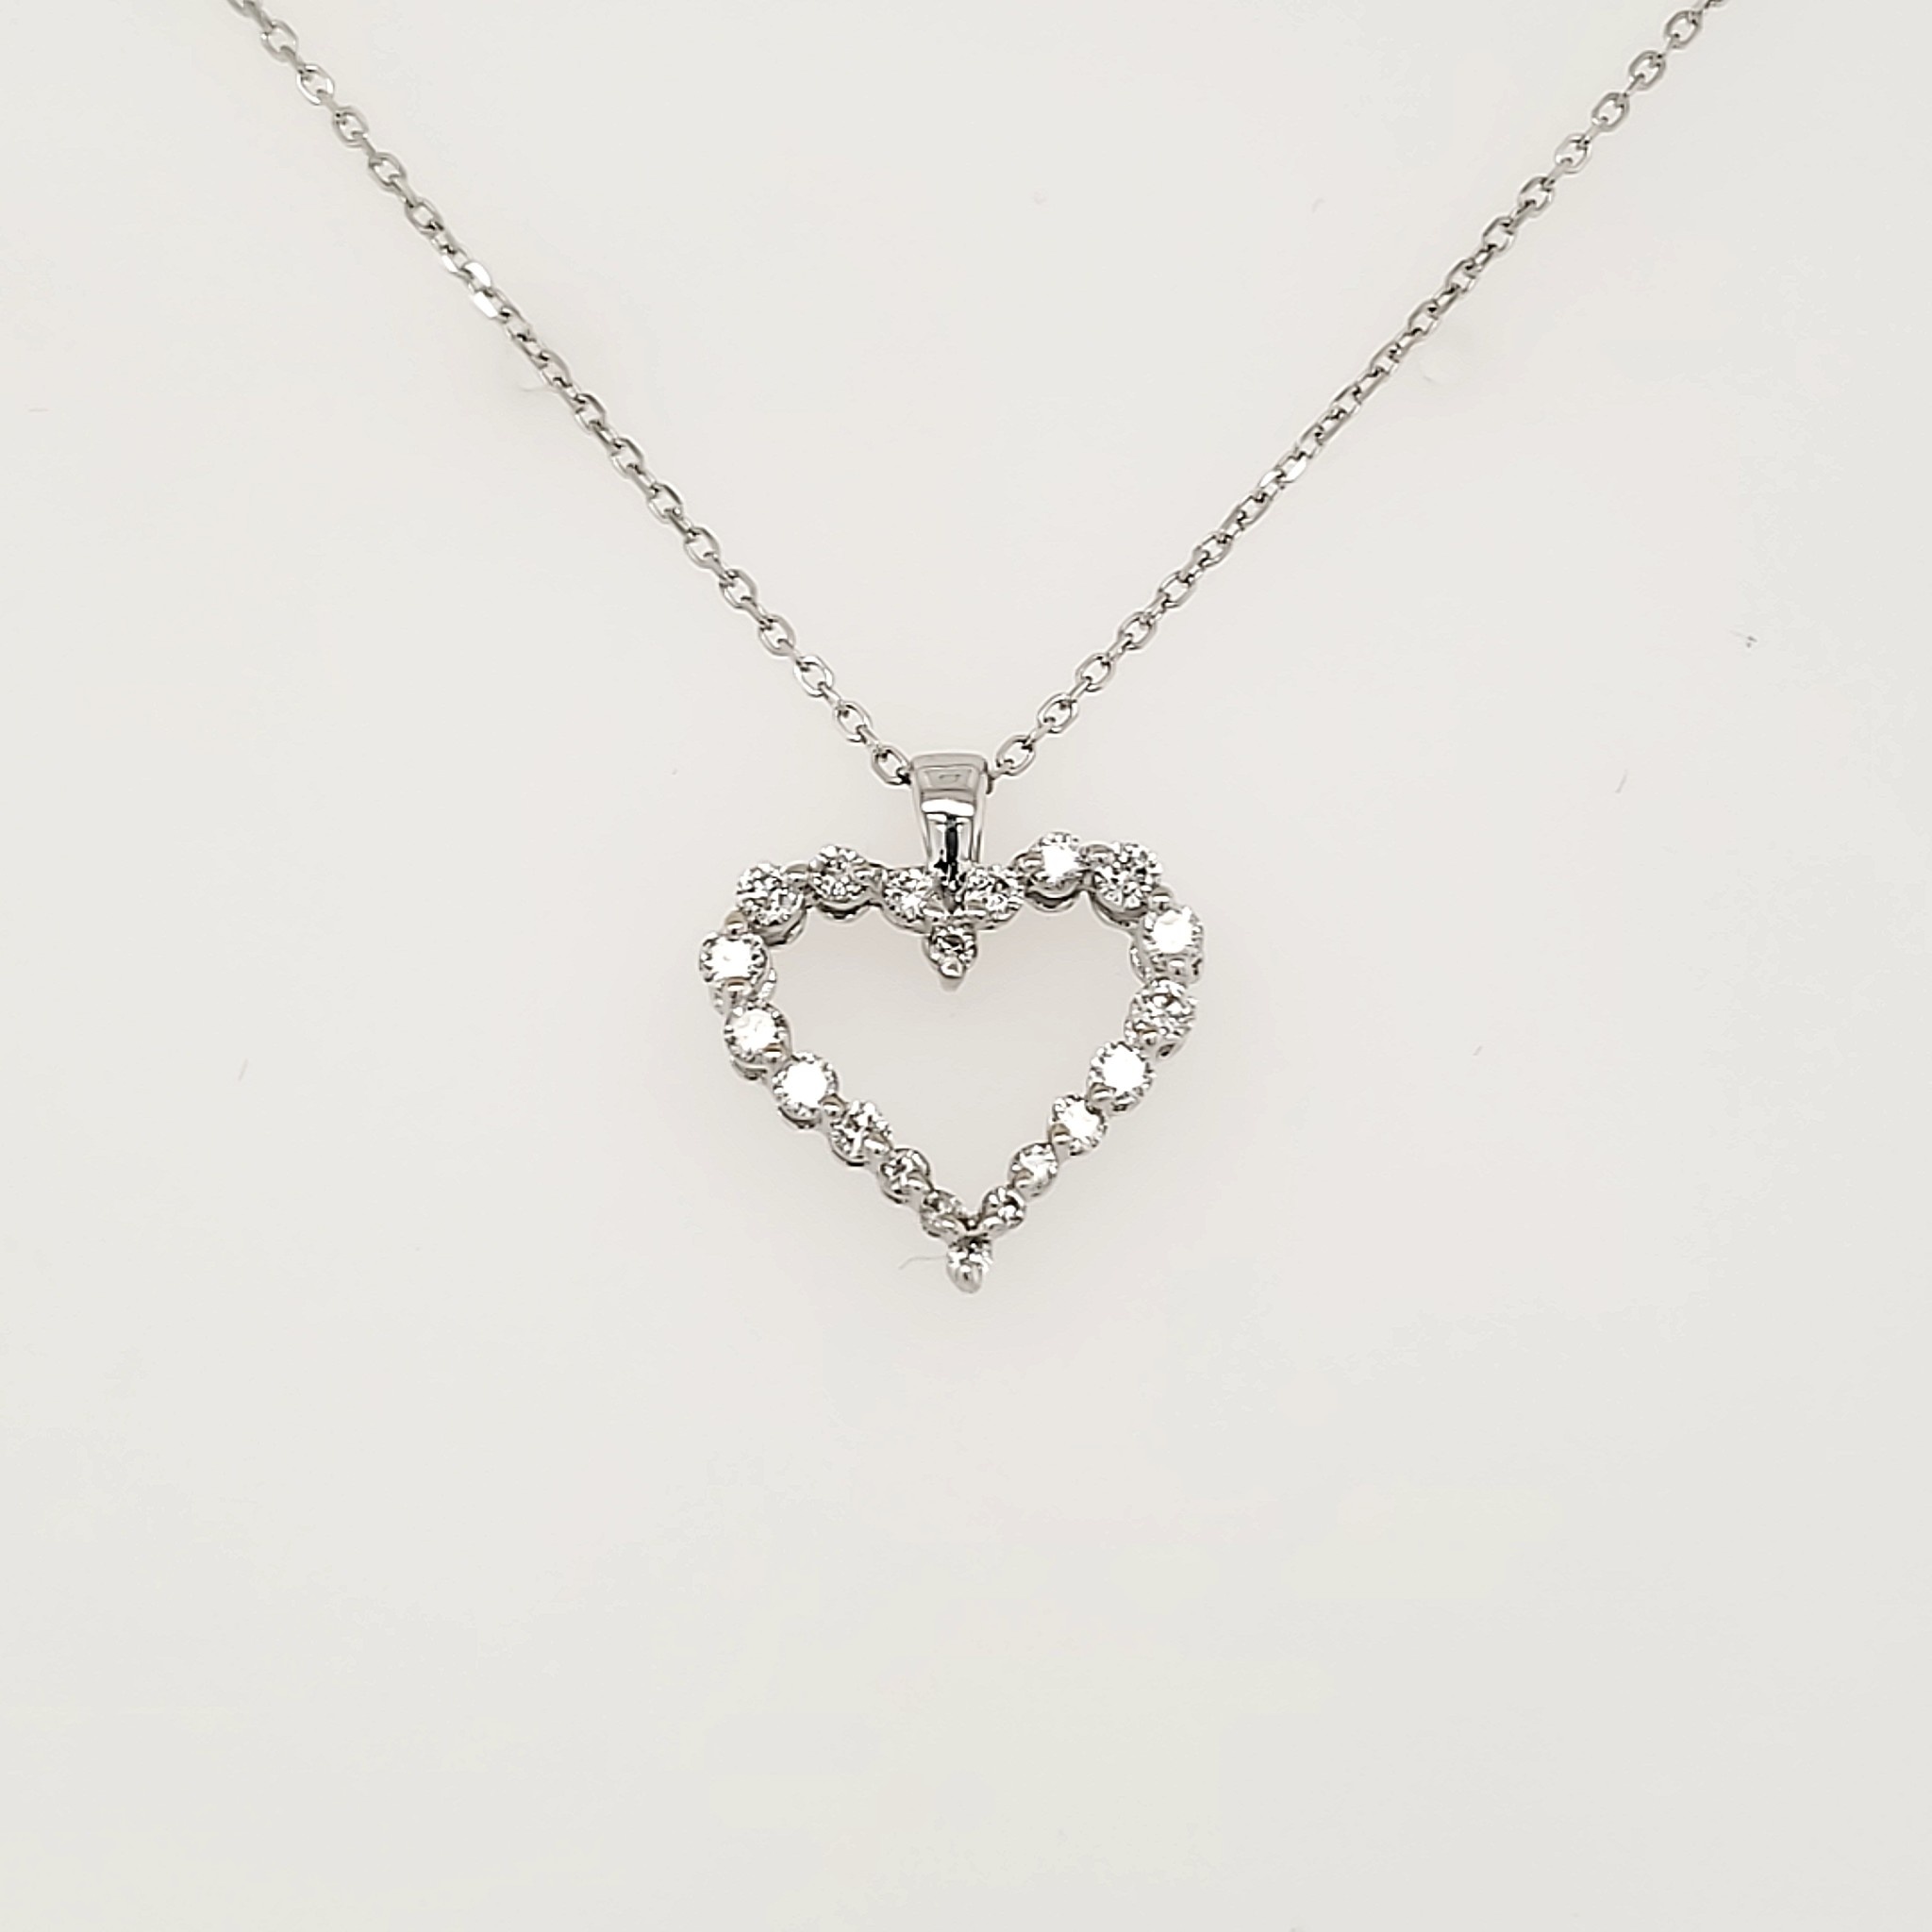 70174 18K WHITE GOLD .20CTW DIAMOND OPEN HEART WITH 14K WHITE GOLD CHAIN PENDNAT NECKLACE